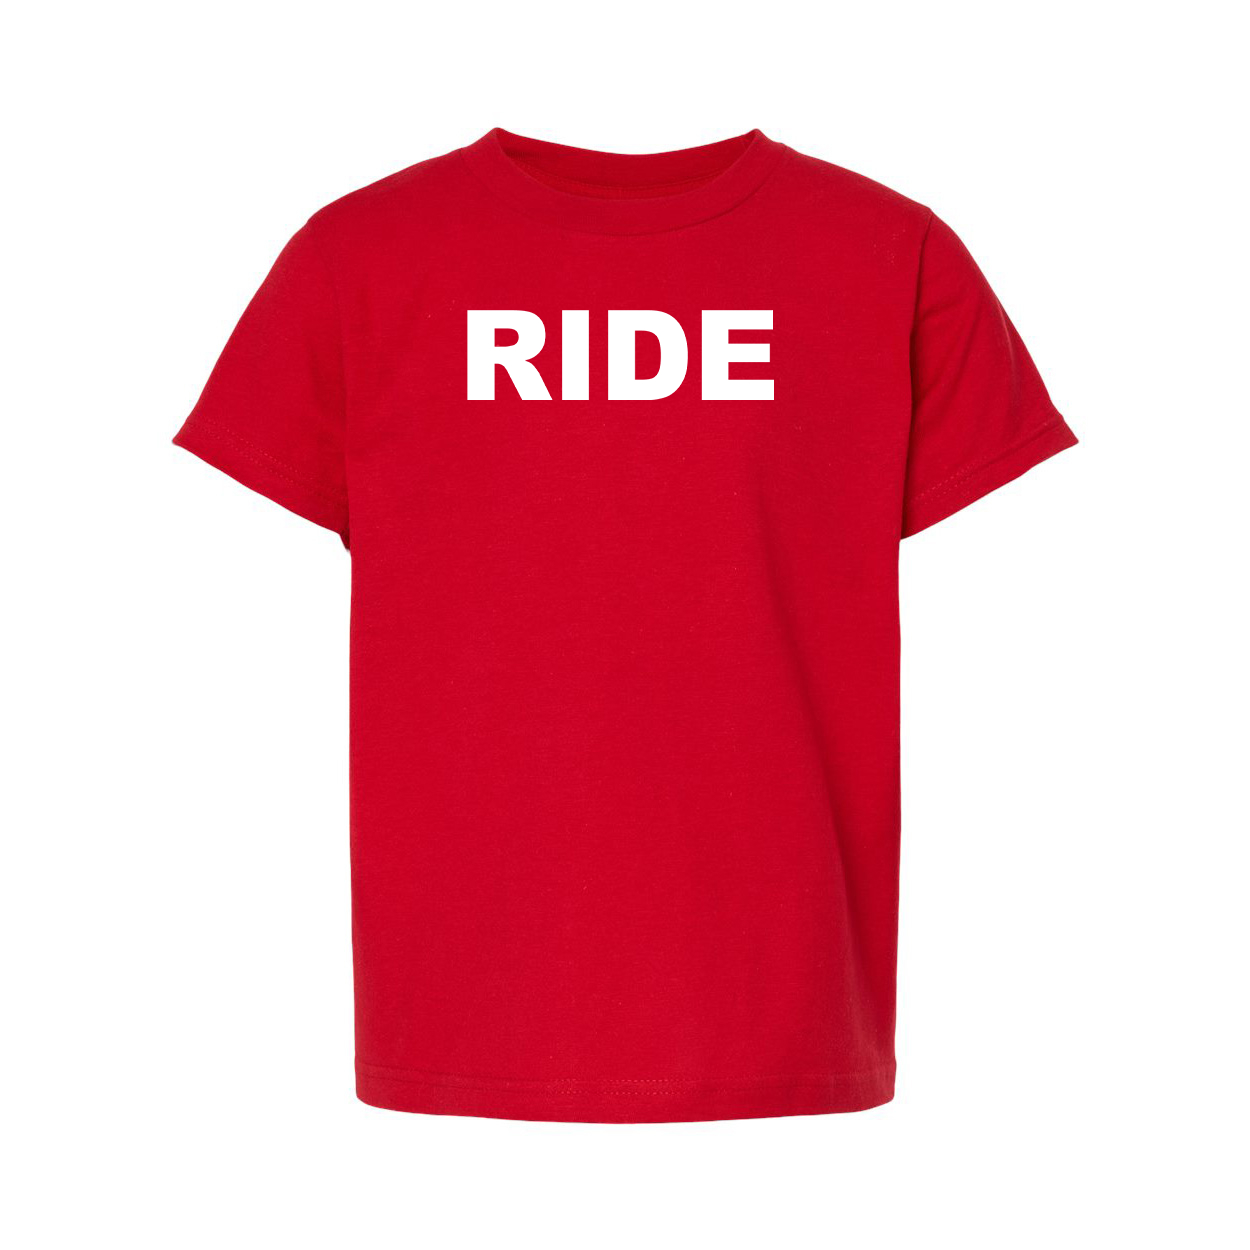 Ride Brand Logo Classic Youth Unisex T-Shirt Red